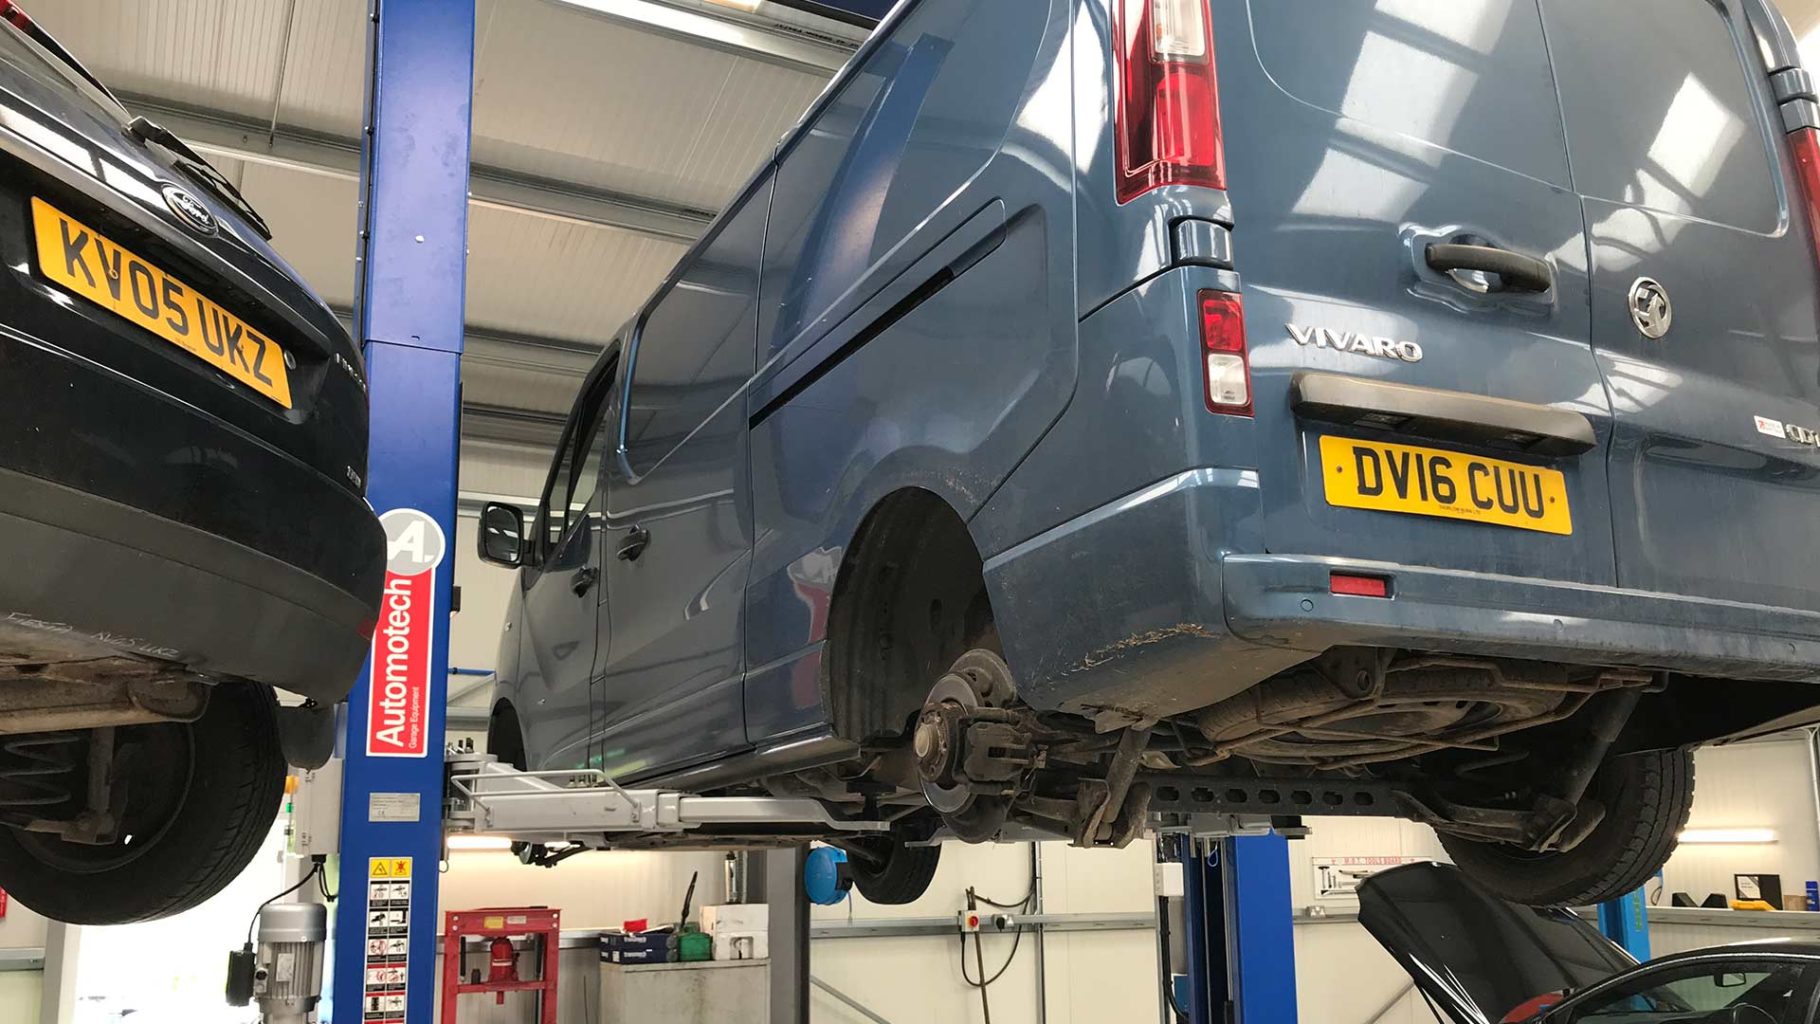 Ford Fiesta and Vauxhall Vivaro being serviced at Chris Williams